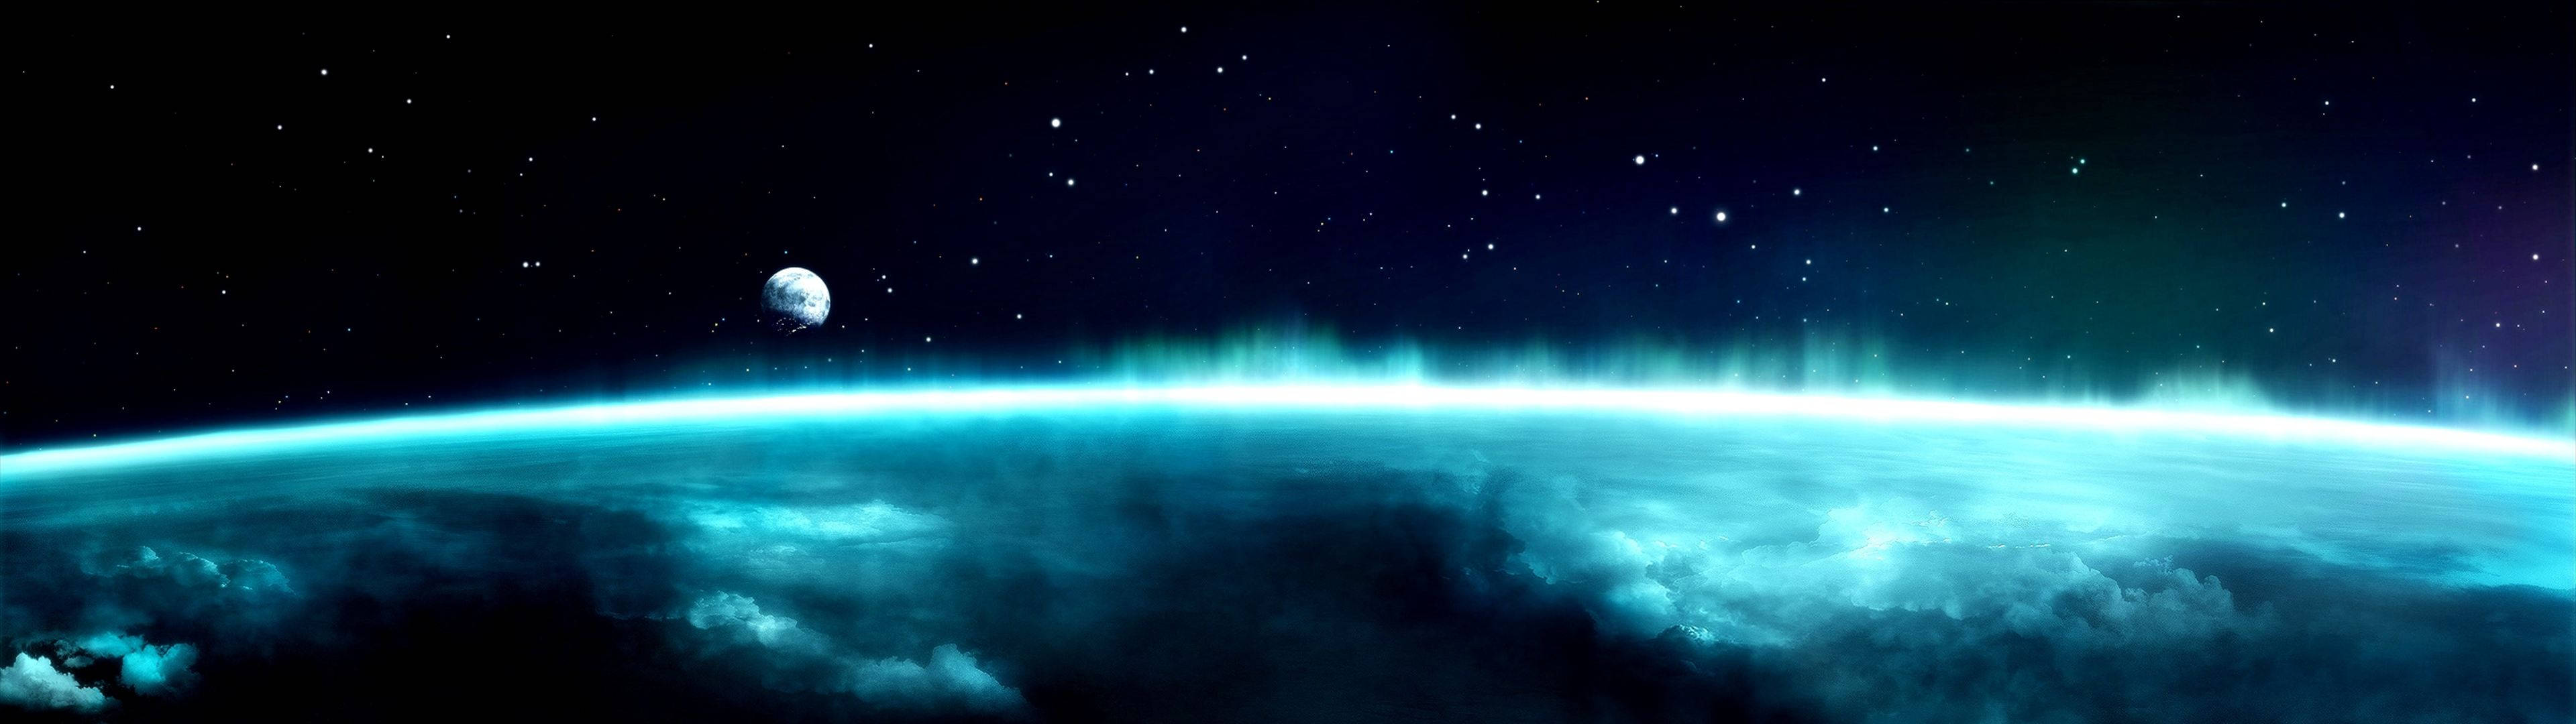 Space View Dual Monitor Wallpaper